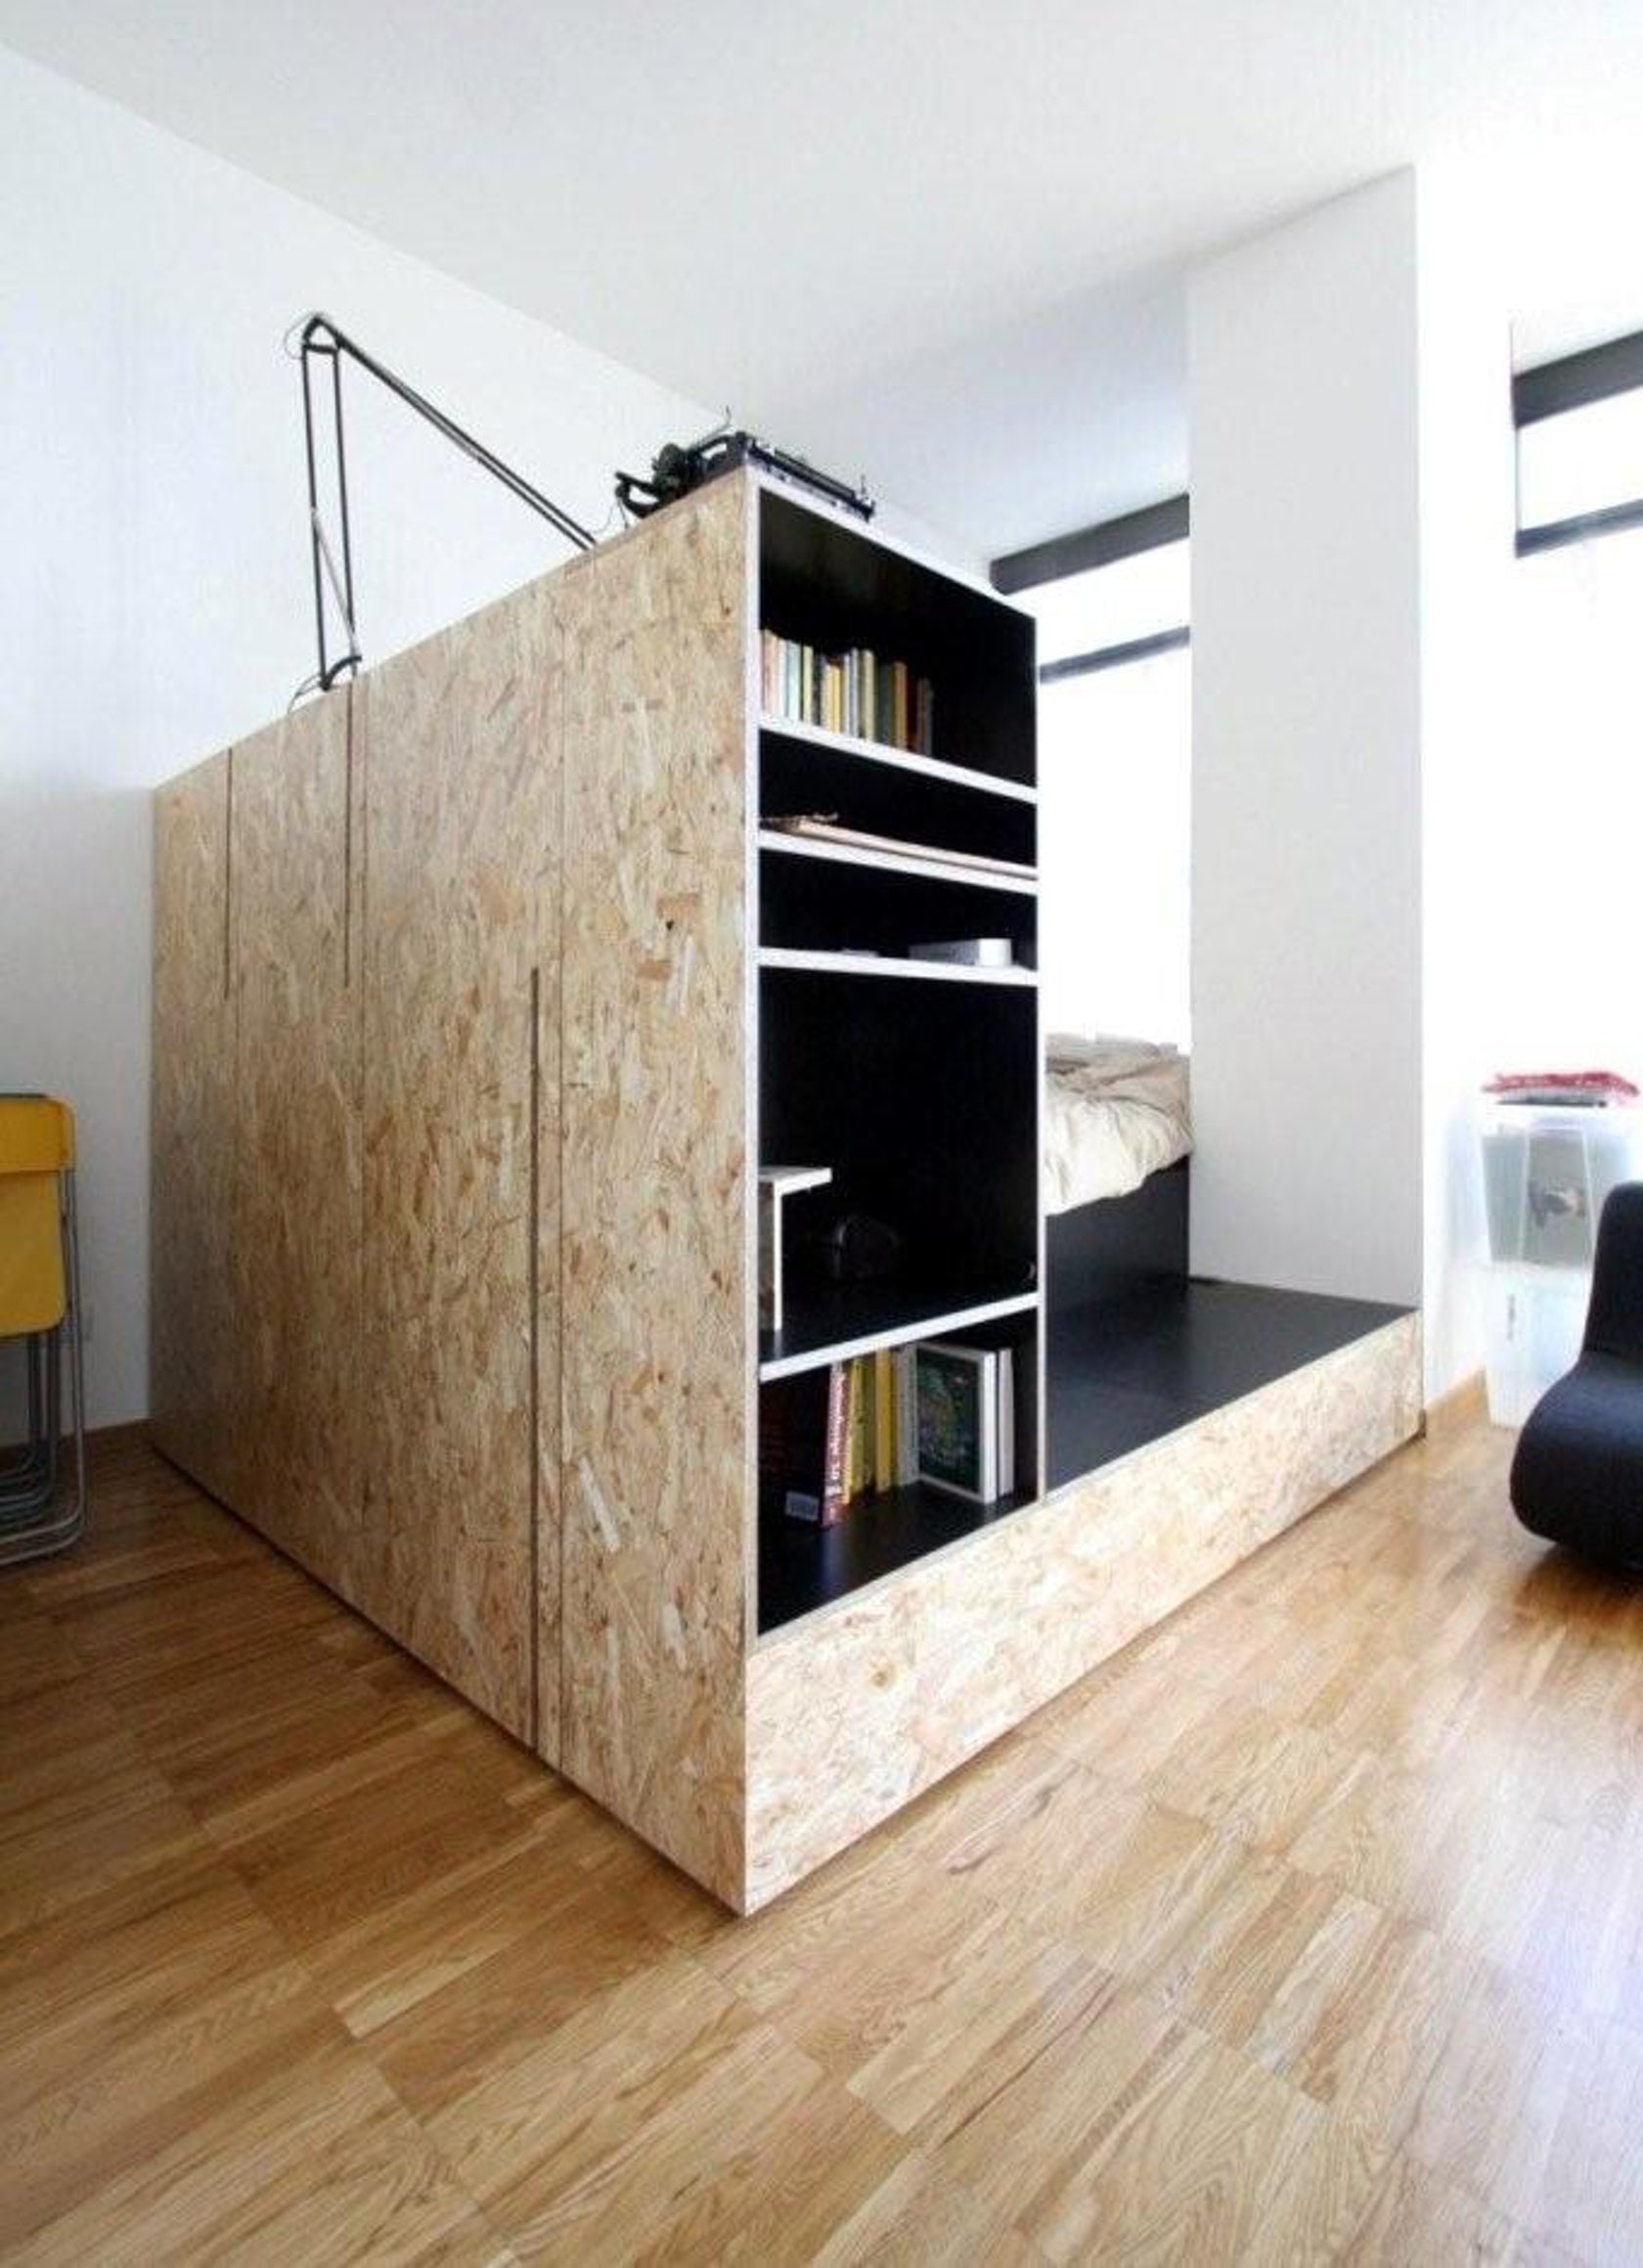 Bed with shelves around it